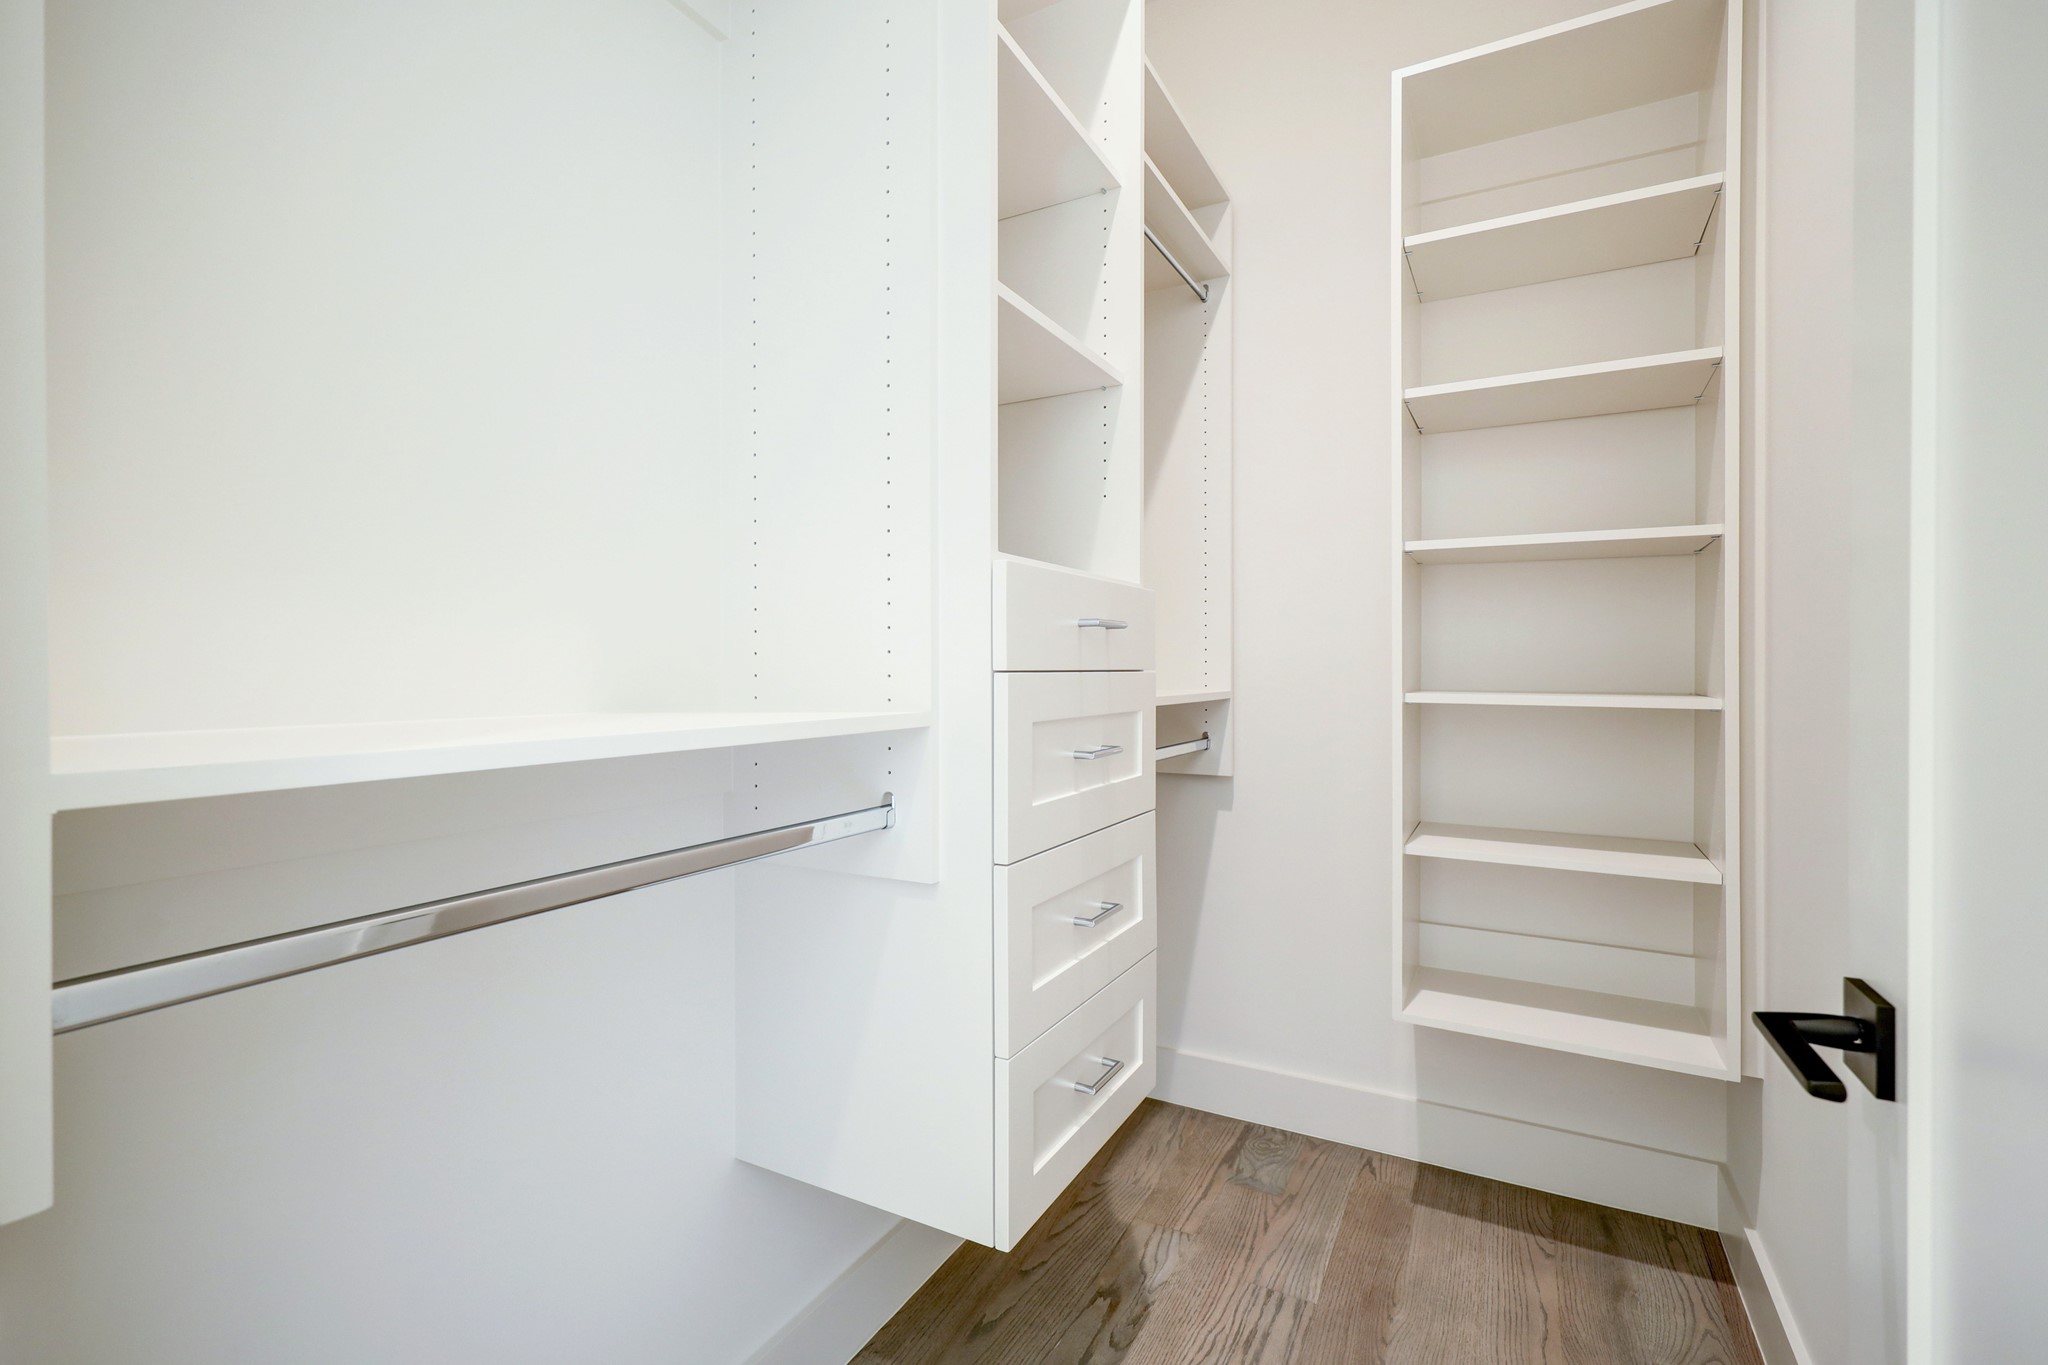 An example of a secondary closet showing built-in drawers, adjustable shelving and hanging.